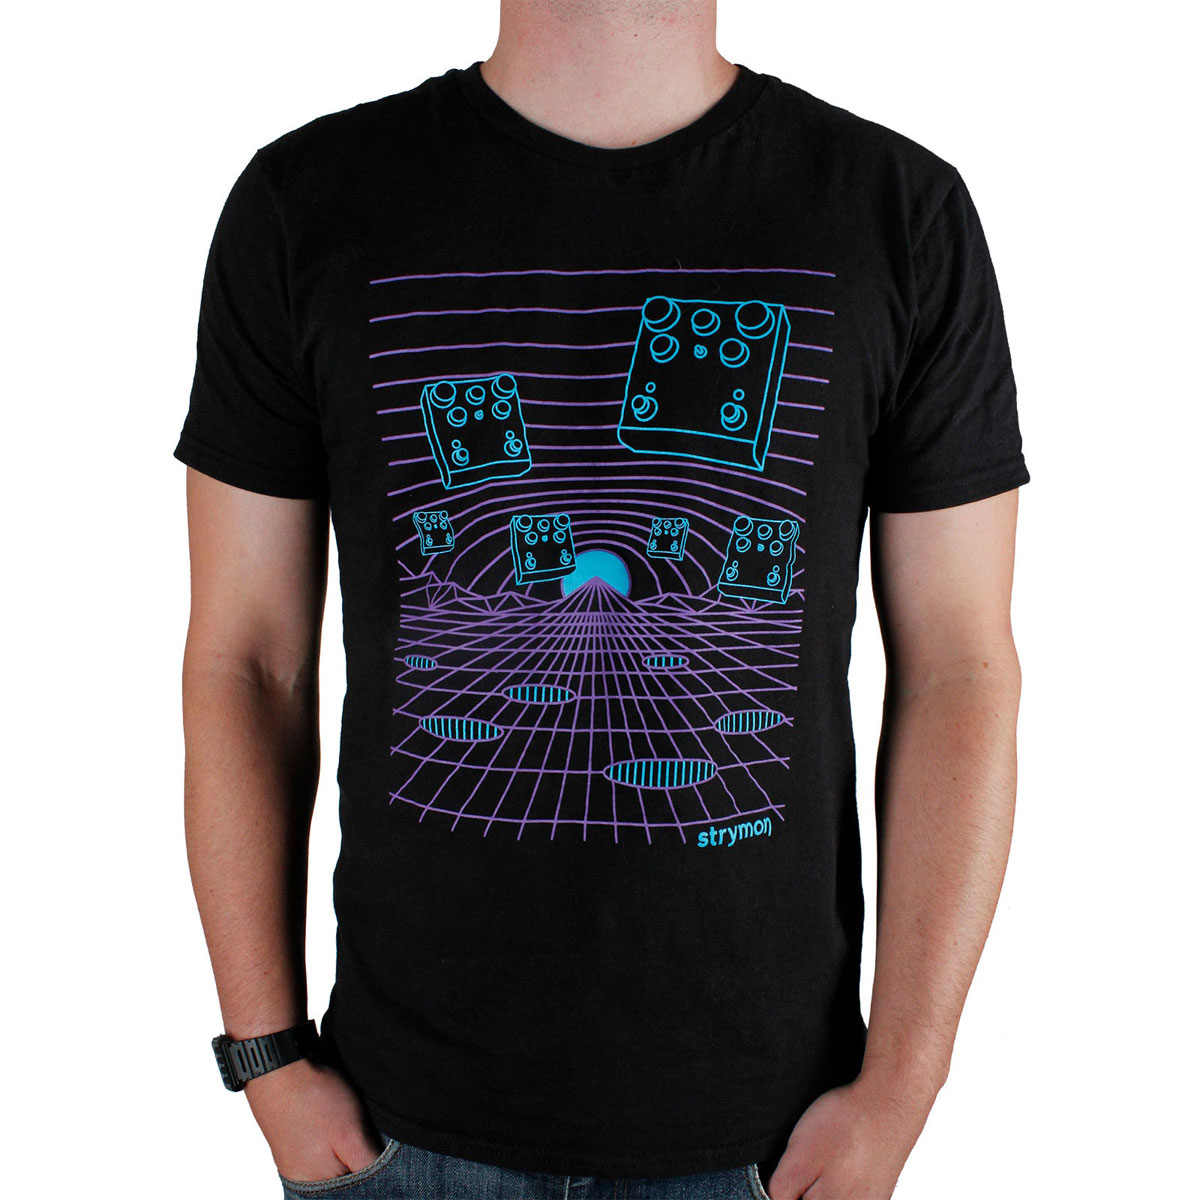 STRYMON TAILLE S - PEDALS IN SPACE T-SHIRT